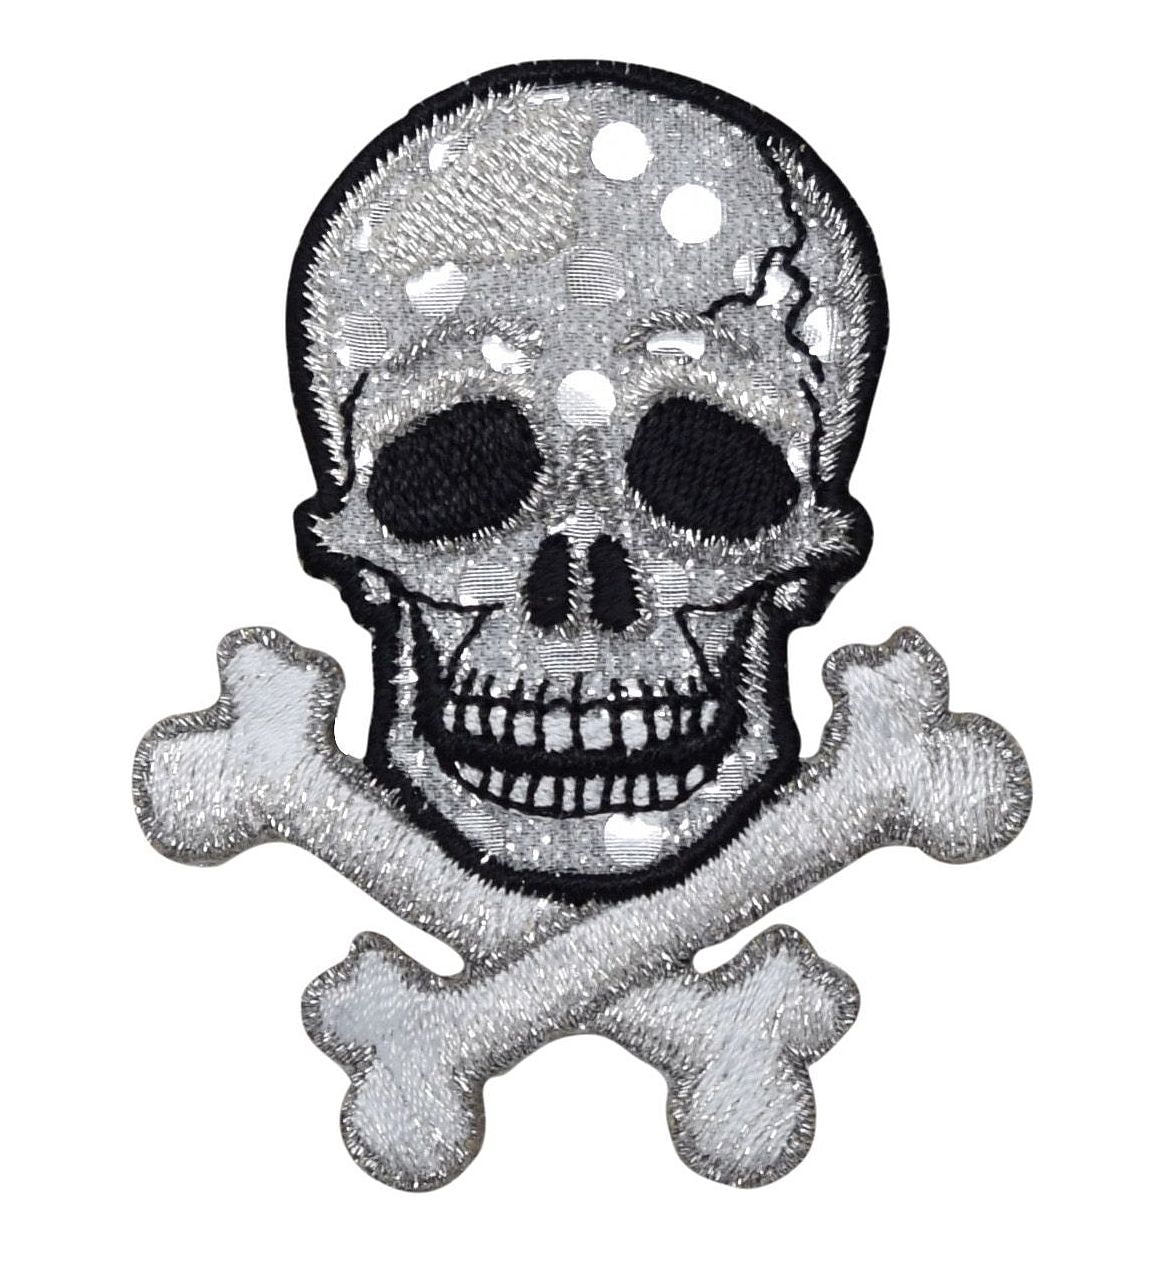 Mini Skull/Crossbones Jolly Roger Iron on Applique/Embroidered Patch 